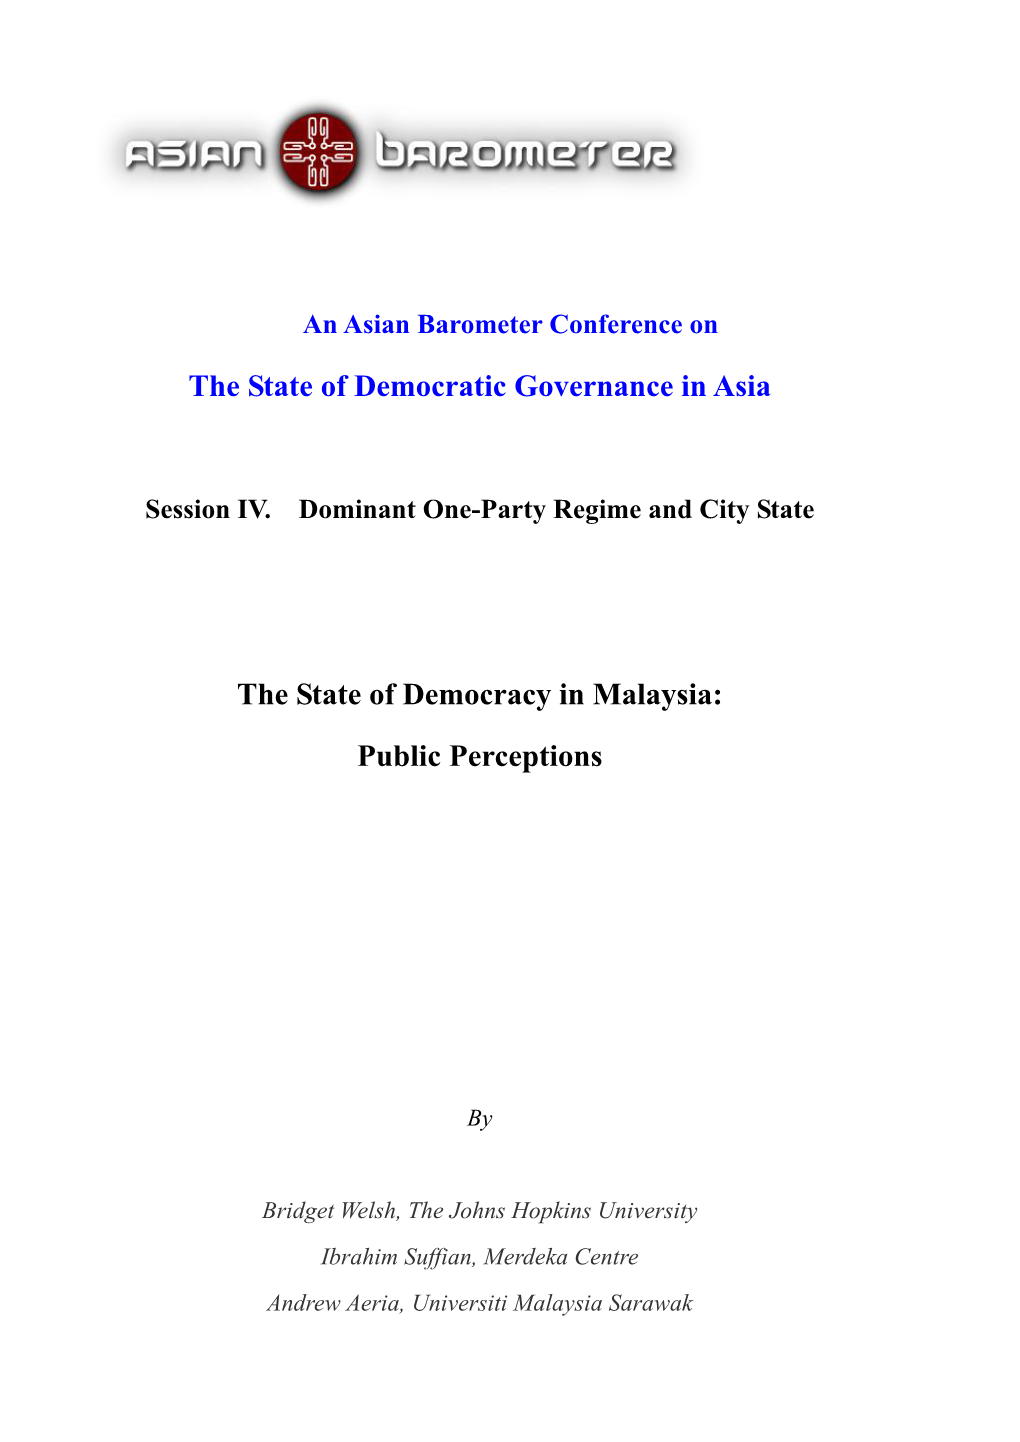 The State of Democratic Governance in Asia the State of Democracy In